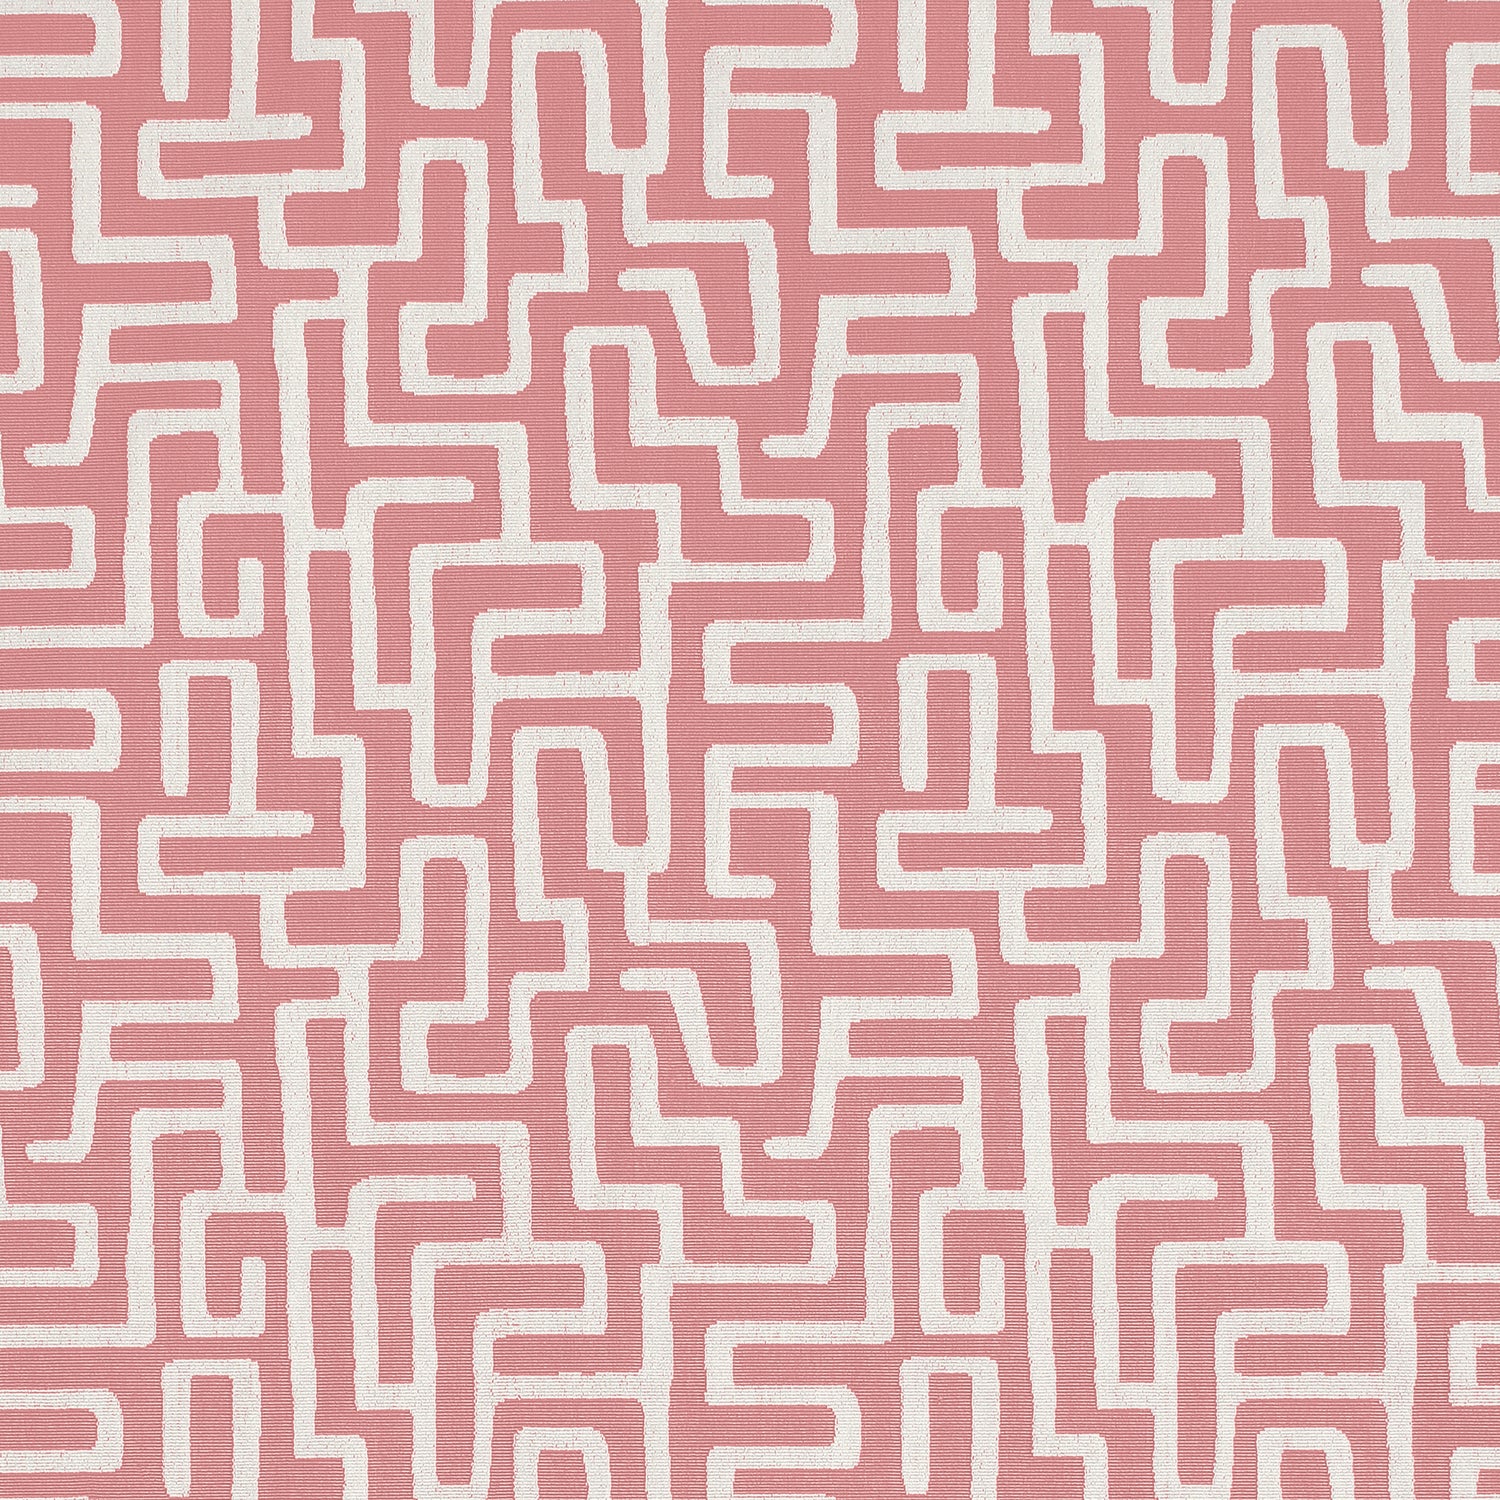 Terrace Lane fabric in blush color - pattern number W742032 - by Thibaut in the Sojourn collection